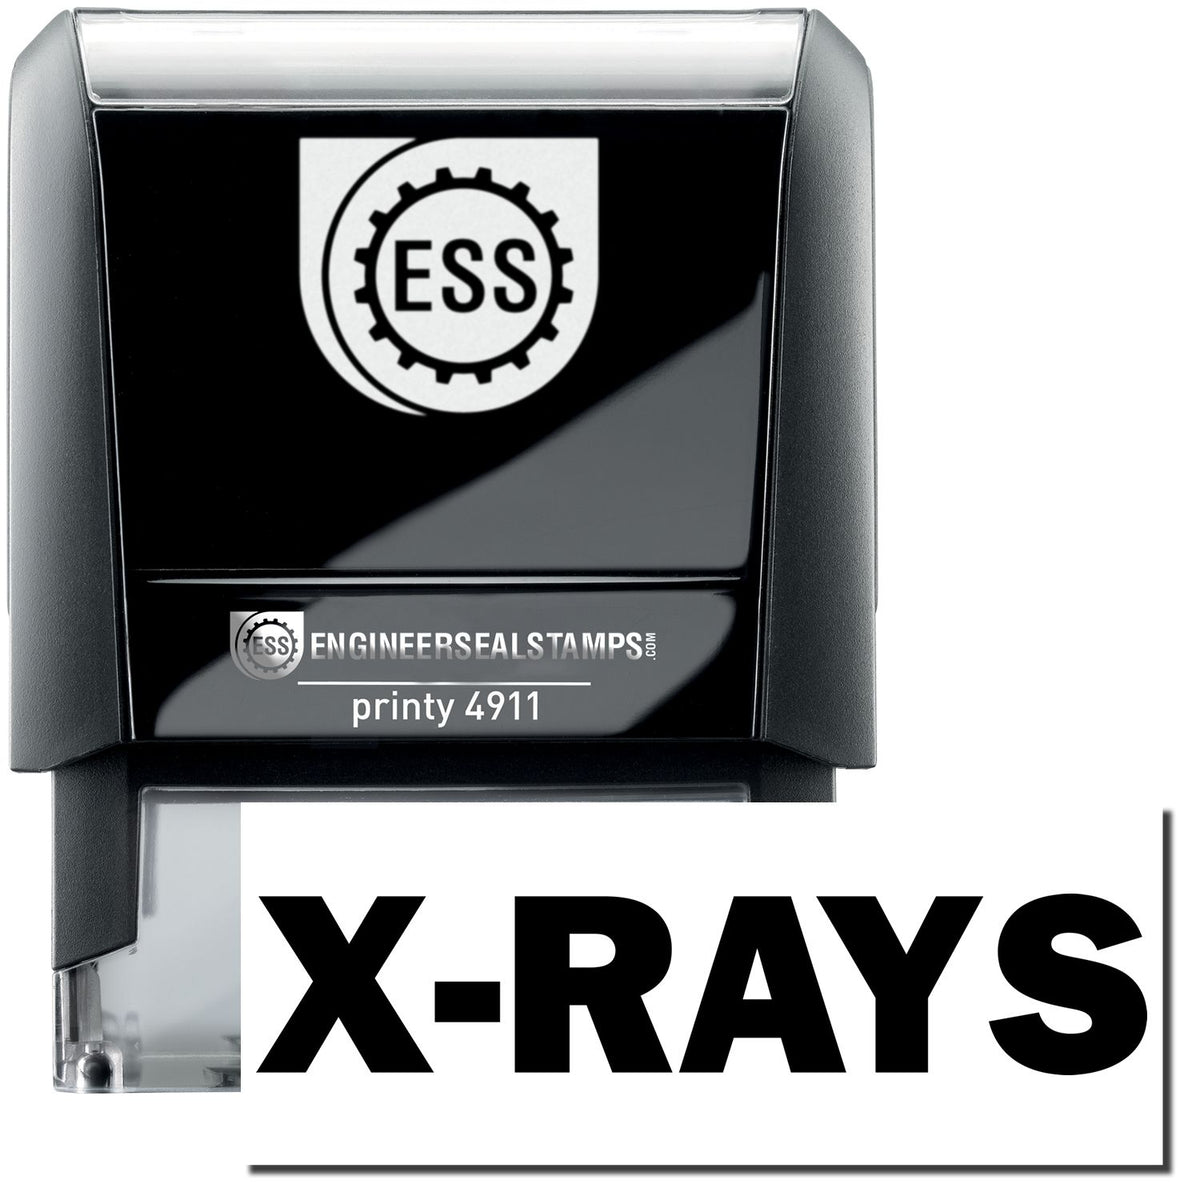 A self-inking stamp with a stamped image showing how the text &quot;X-RAYS&quot; is displayed after stamping.